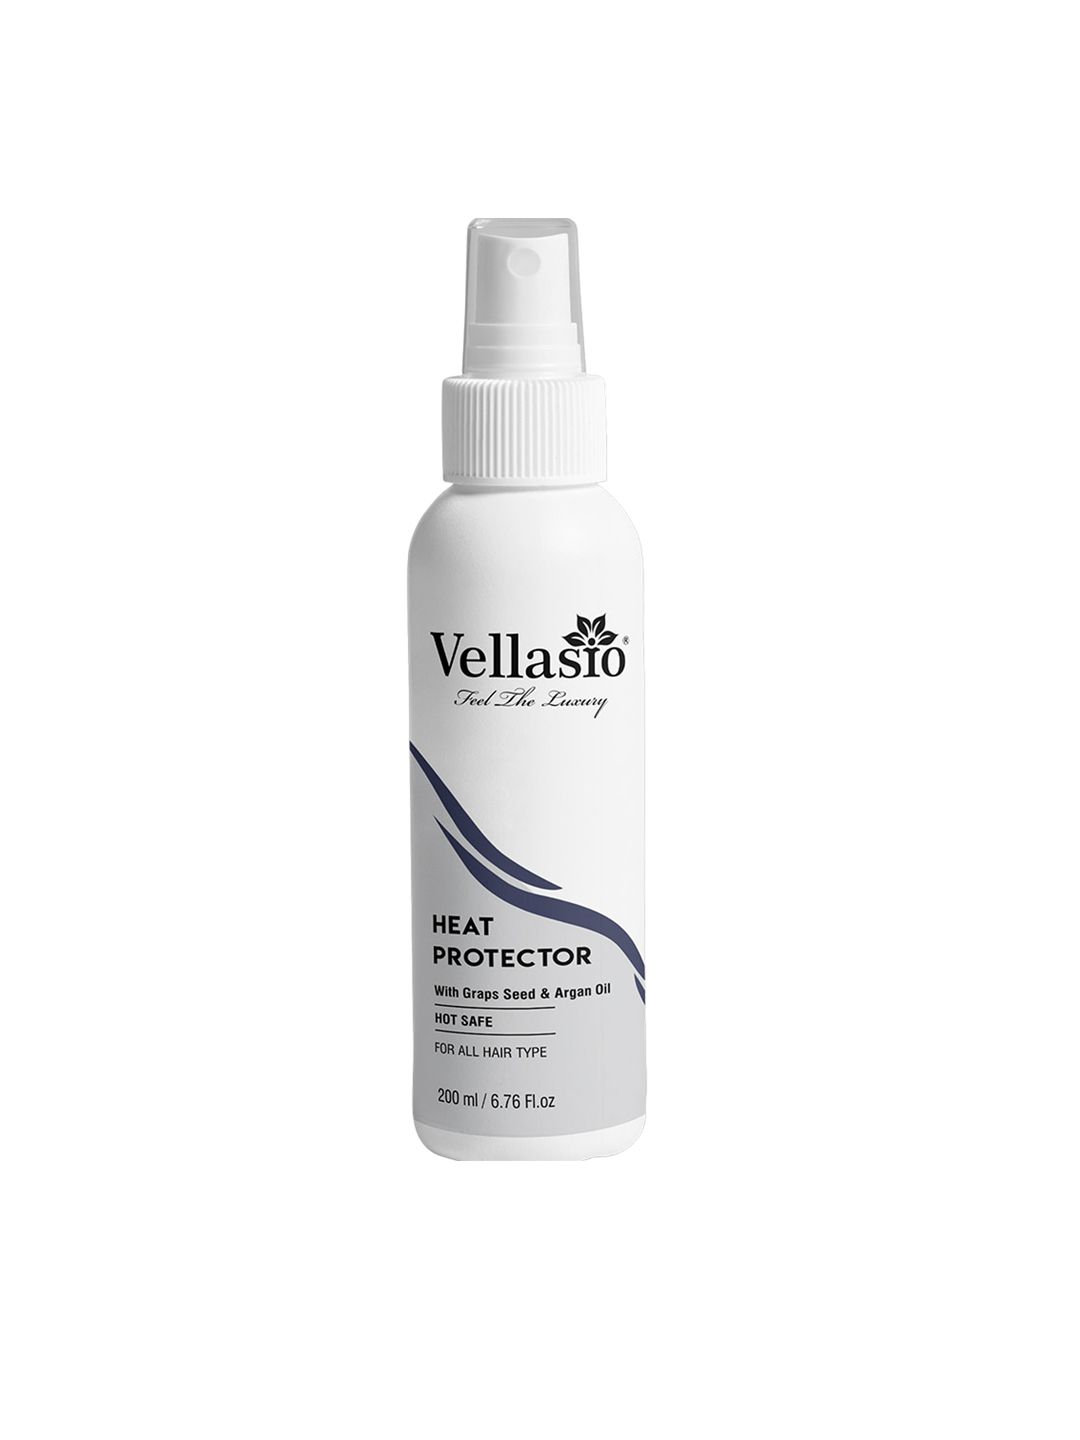 Vellasio Heat Protection Spray with Argan & Grapeseed Oil 200 ml Price in India